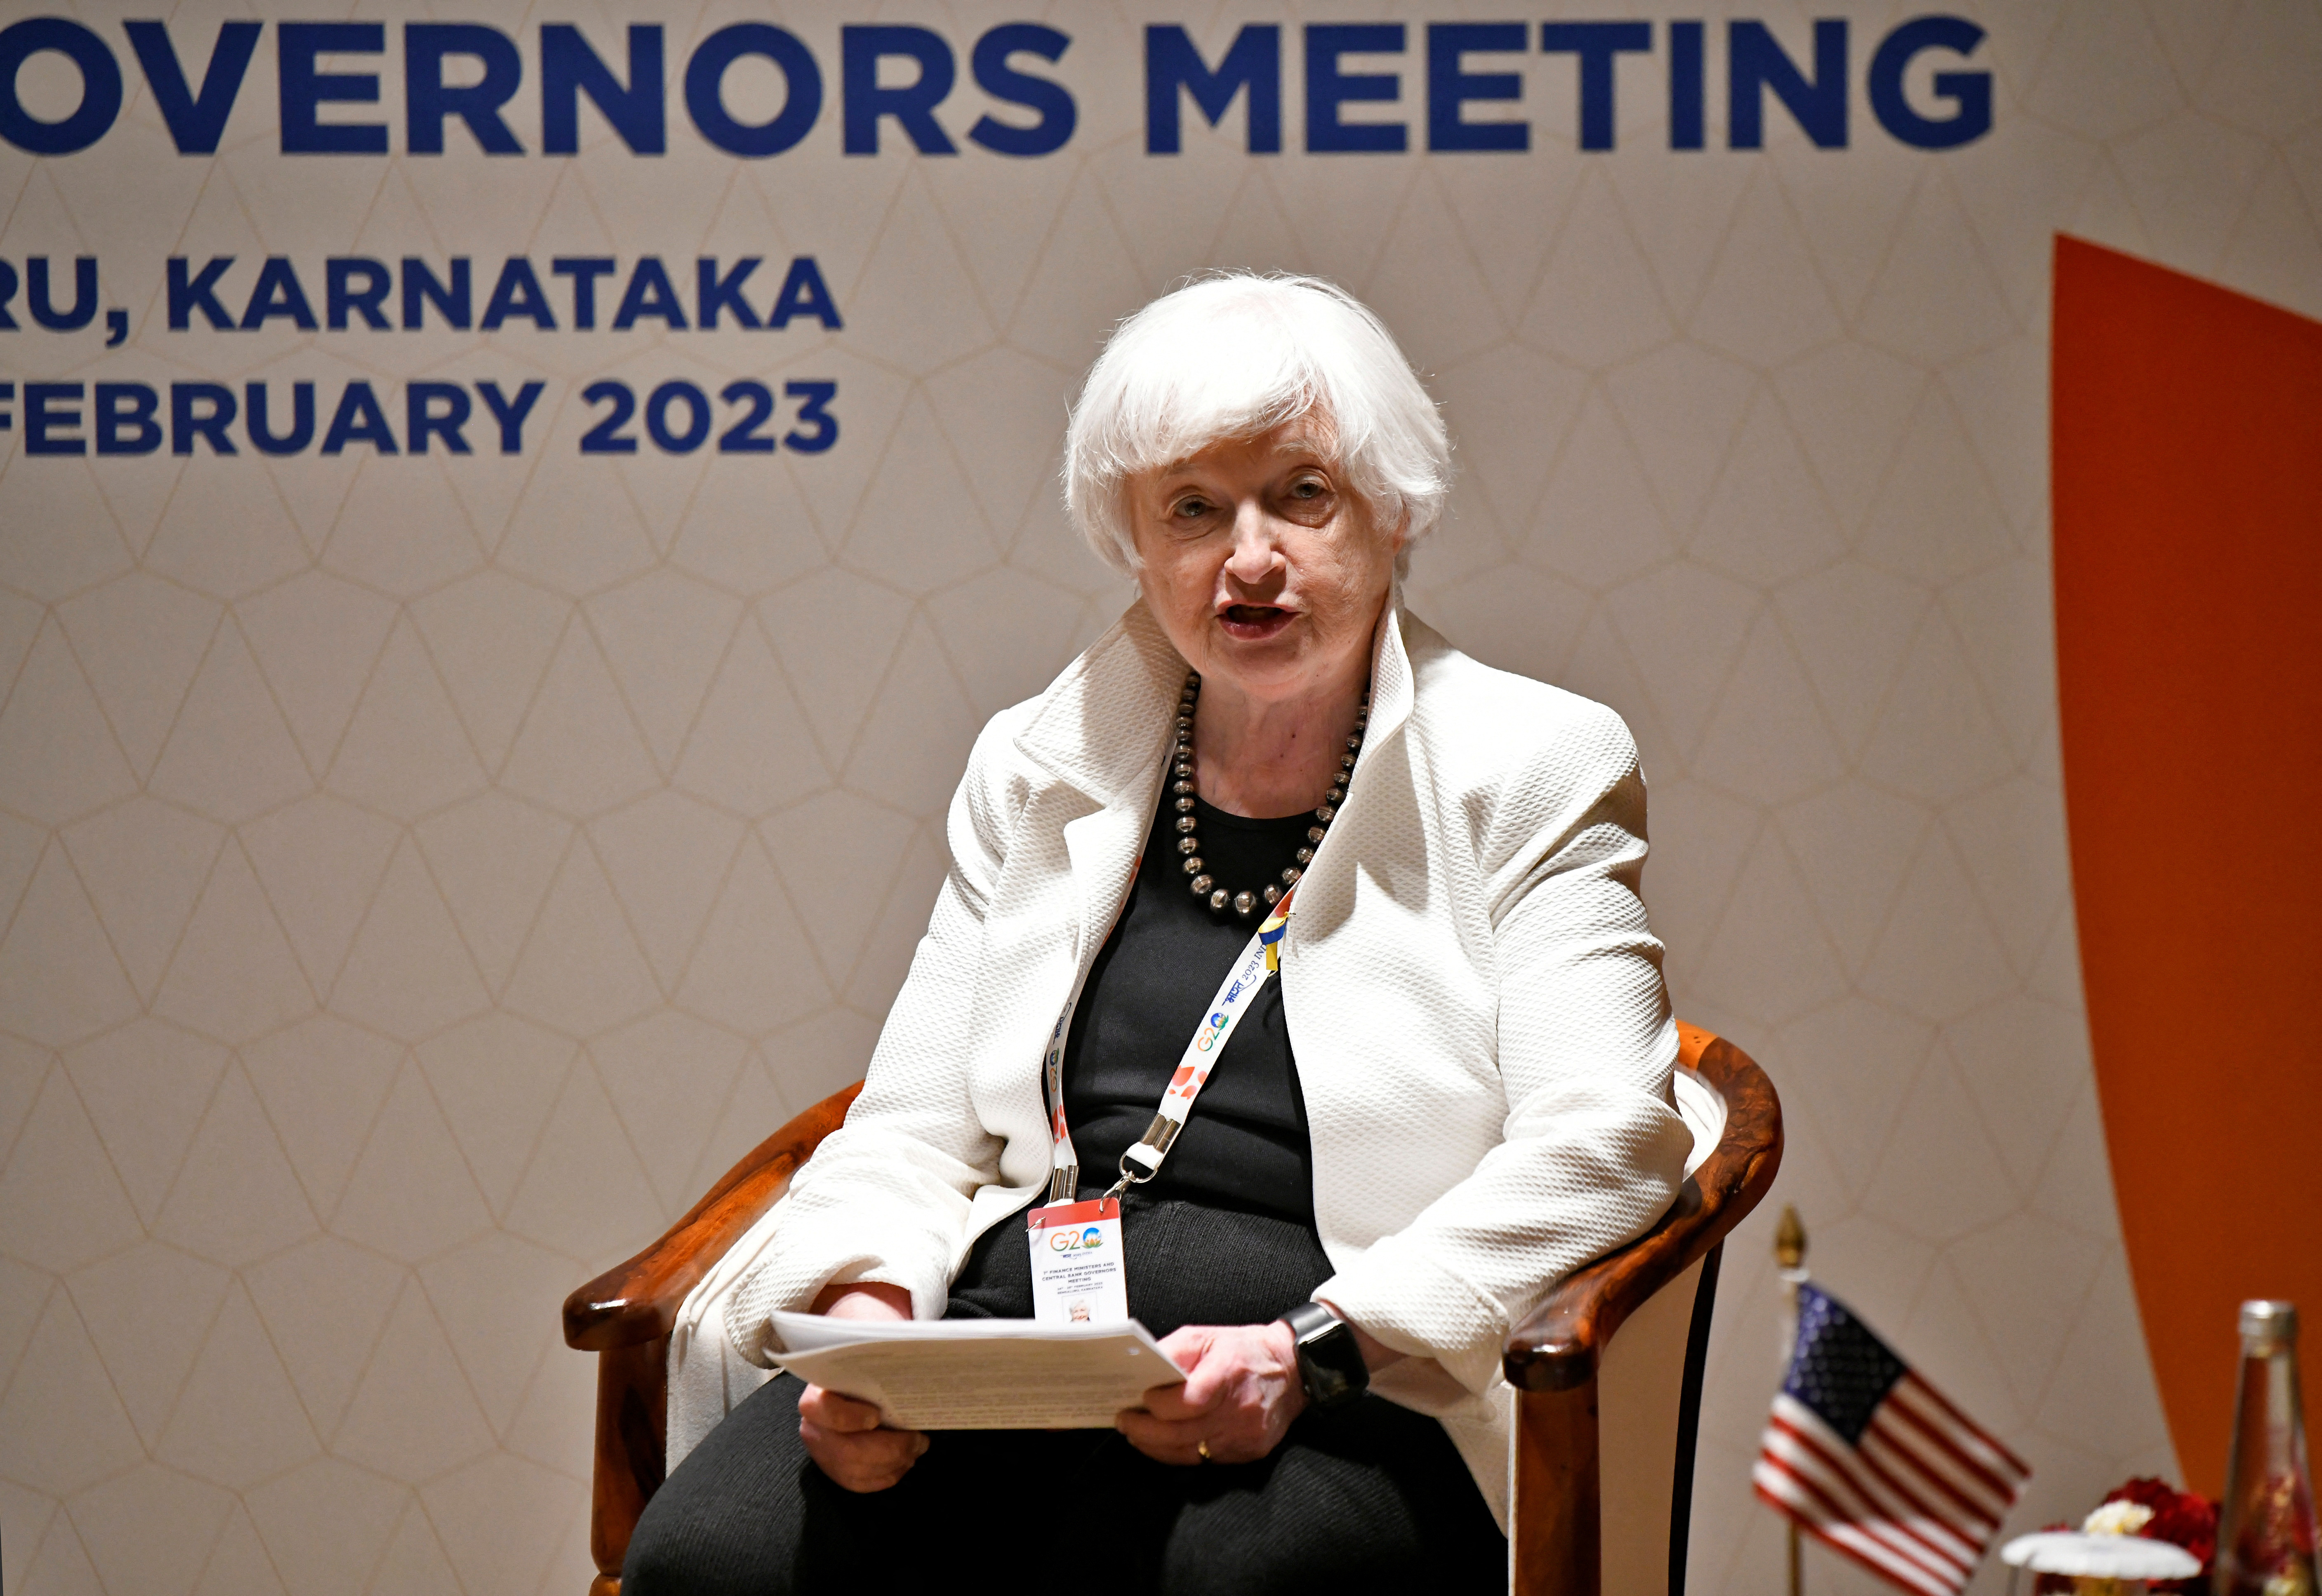 British Chancellor of the Exchequer Jeremy Hunt and U.S. Treasury Secretary Janet Yellen during their bilateral meeting on outskirts of Bengaluru